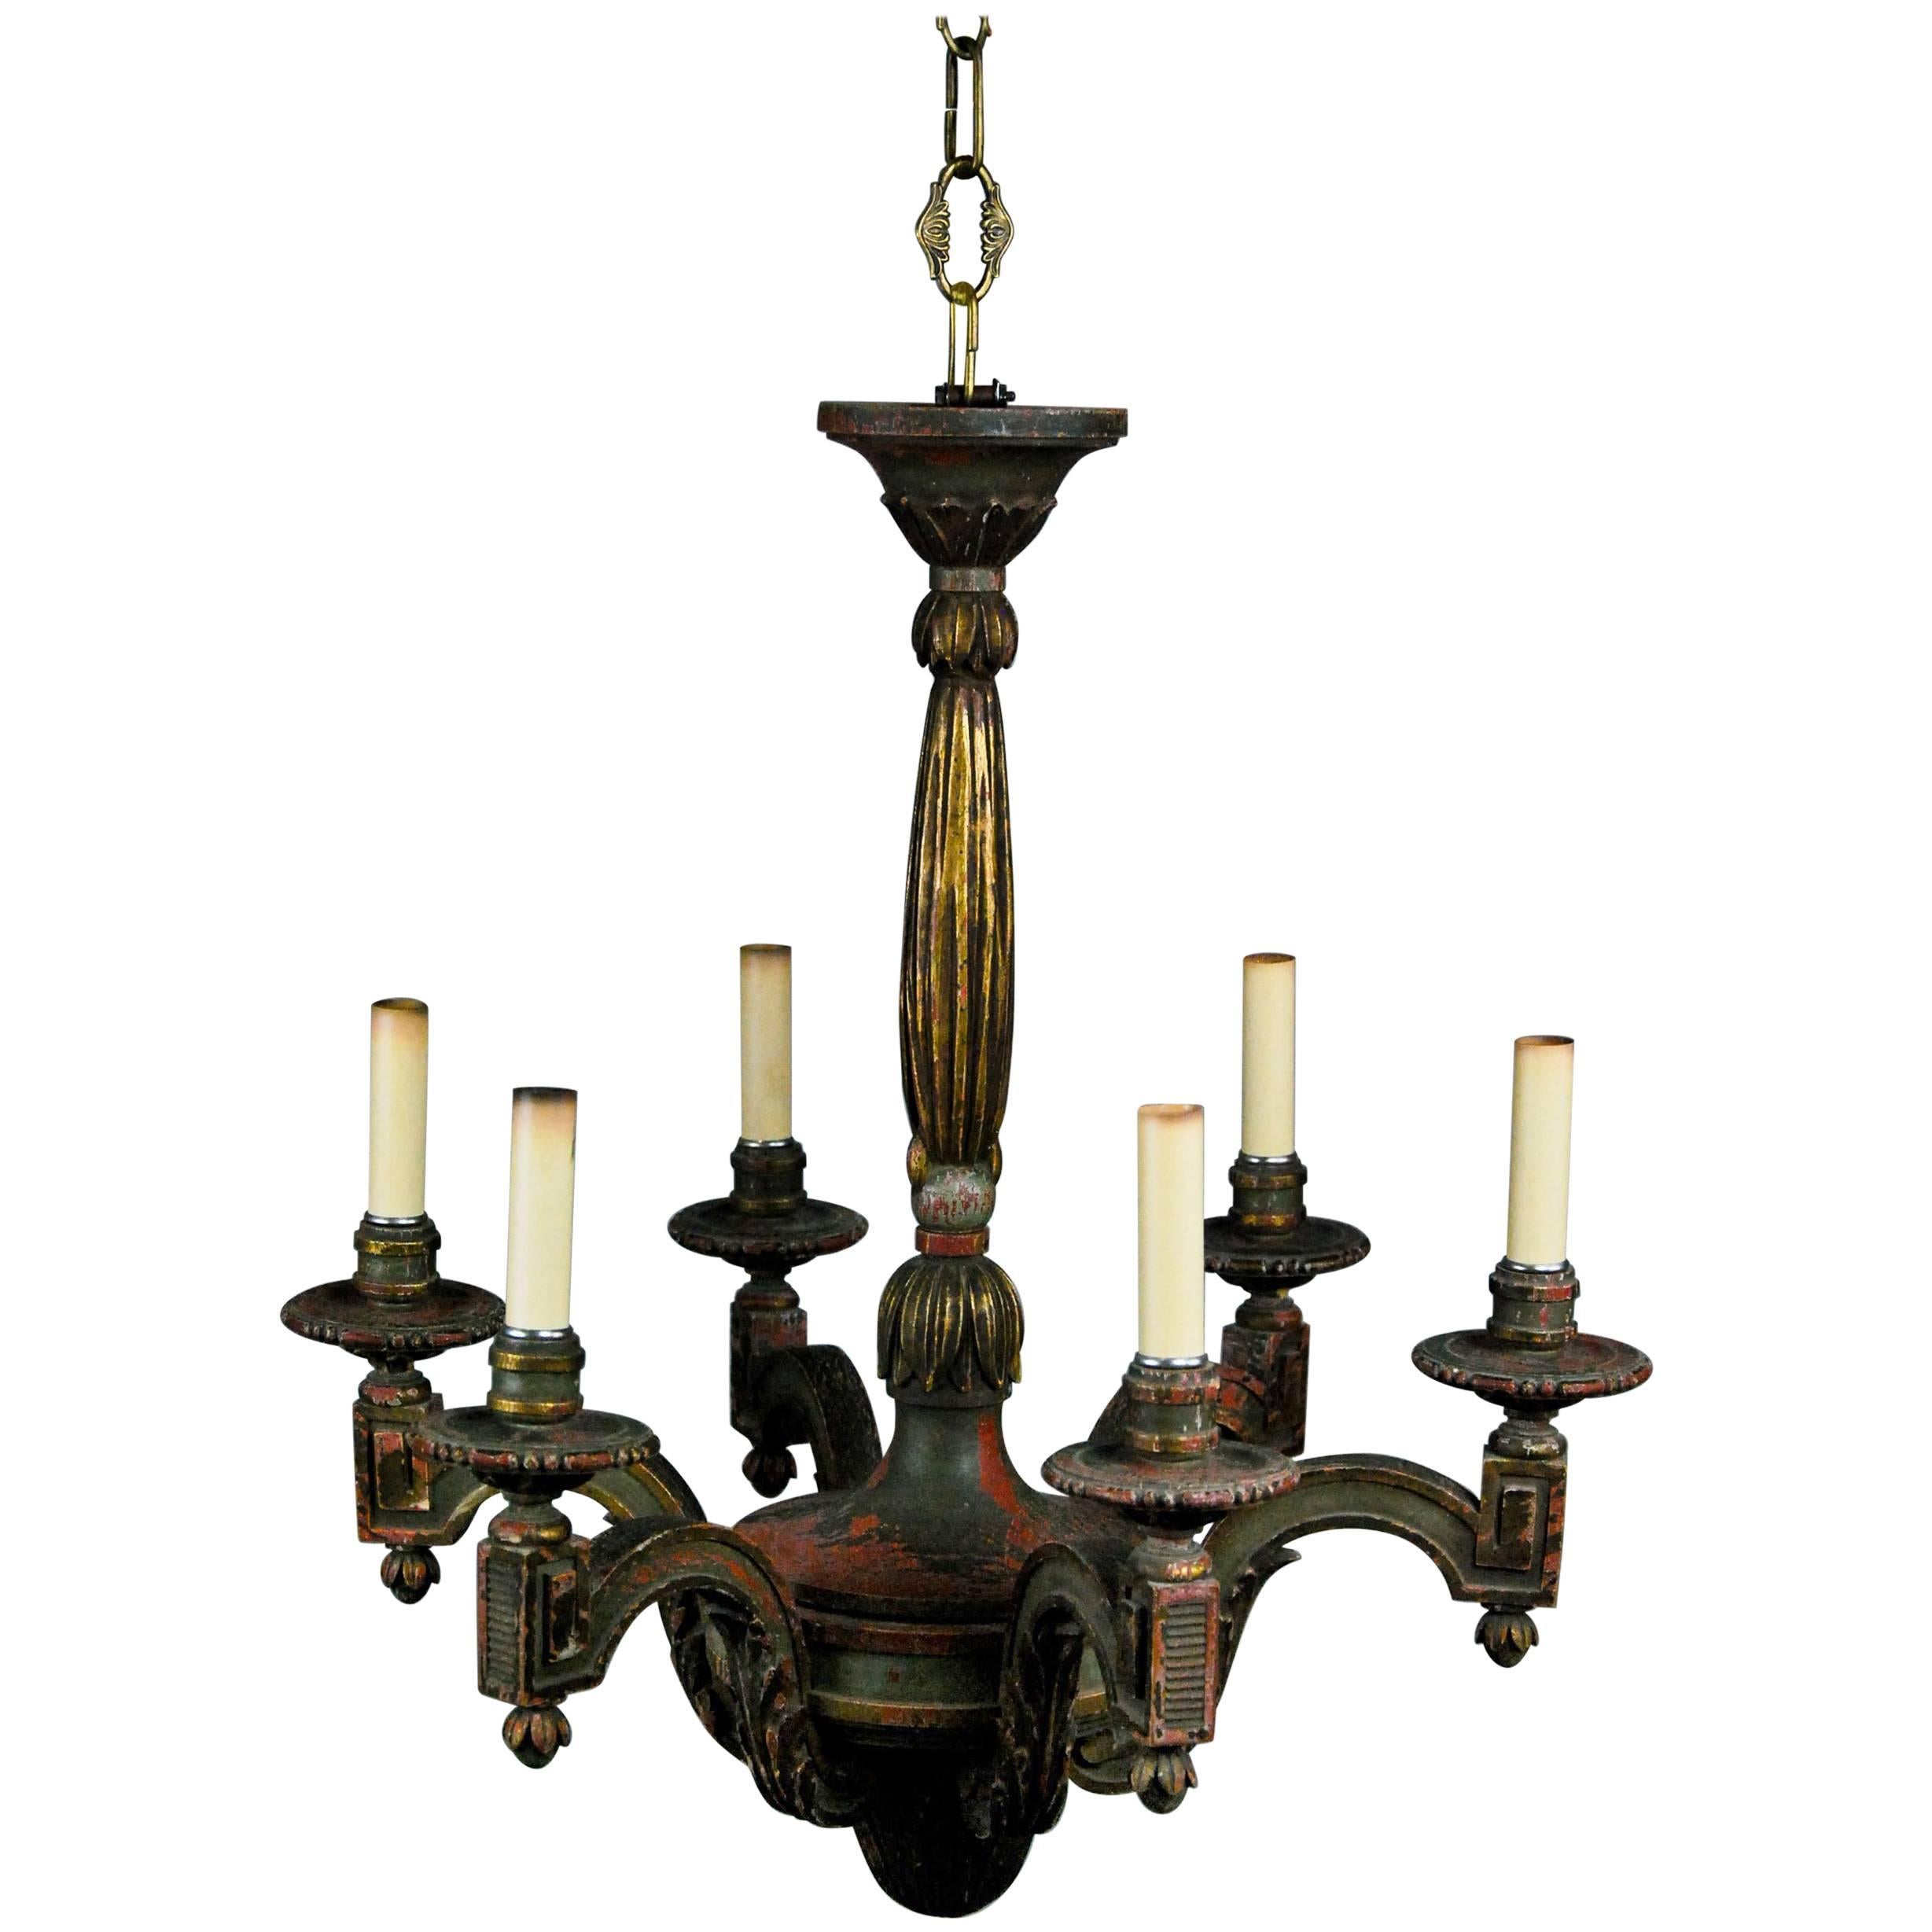 20th Century Wooden Six-Arm French Neoclassical Painted Chandelier